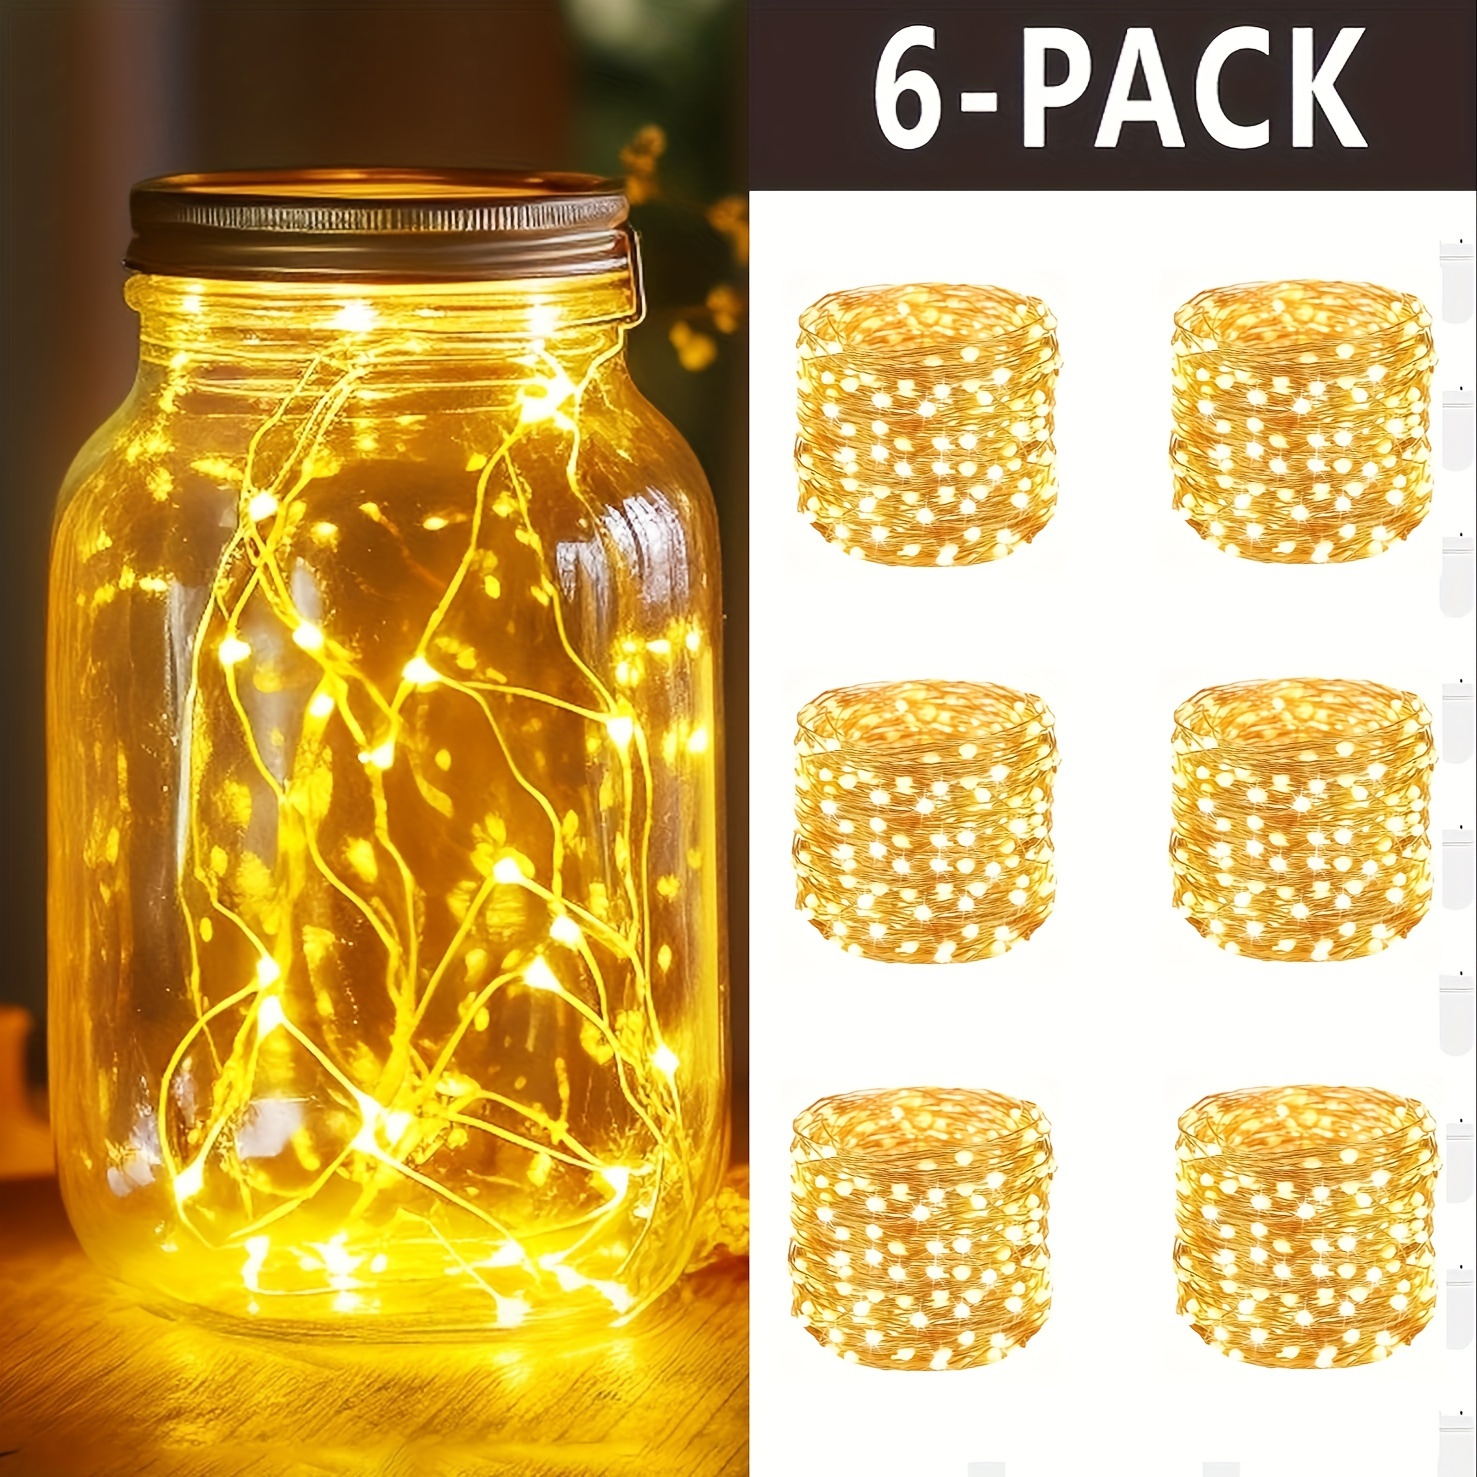 String Light Storage Containers at